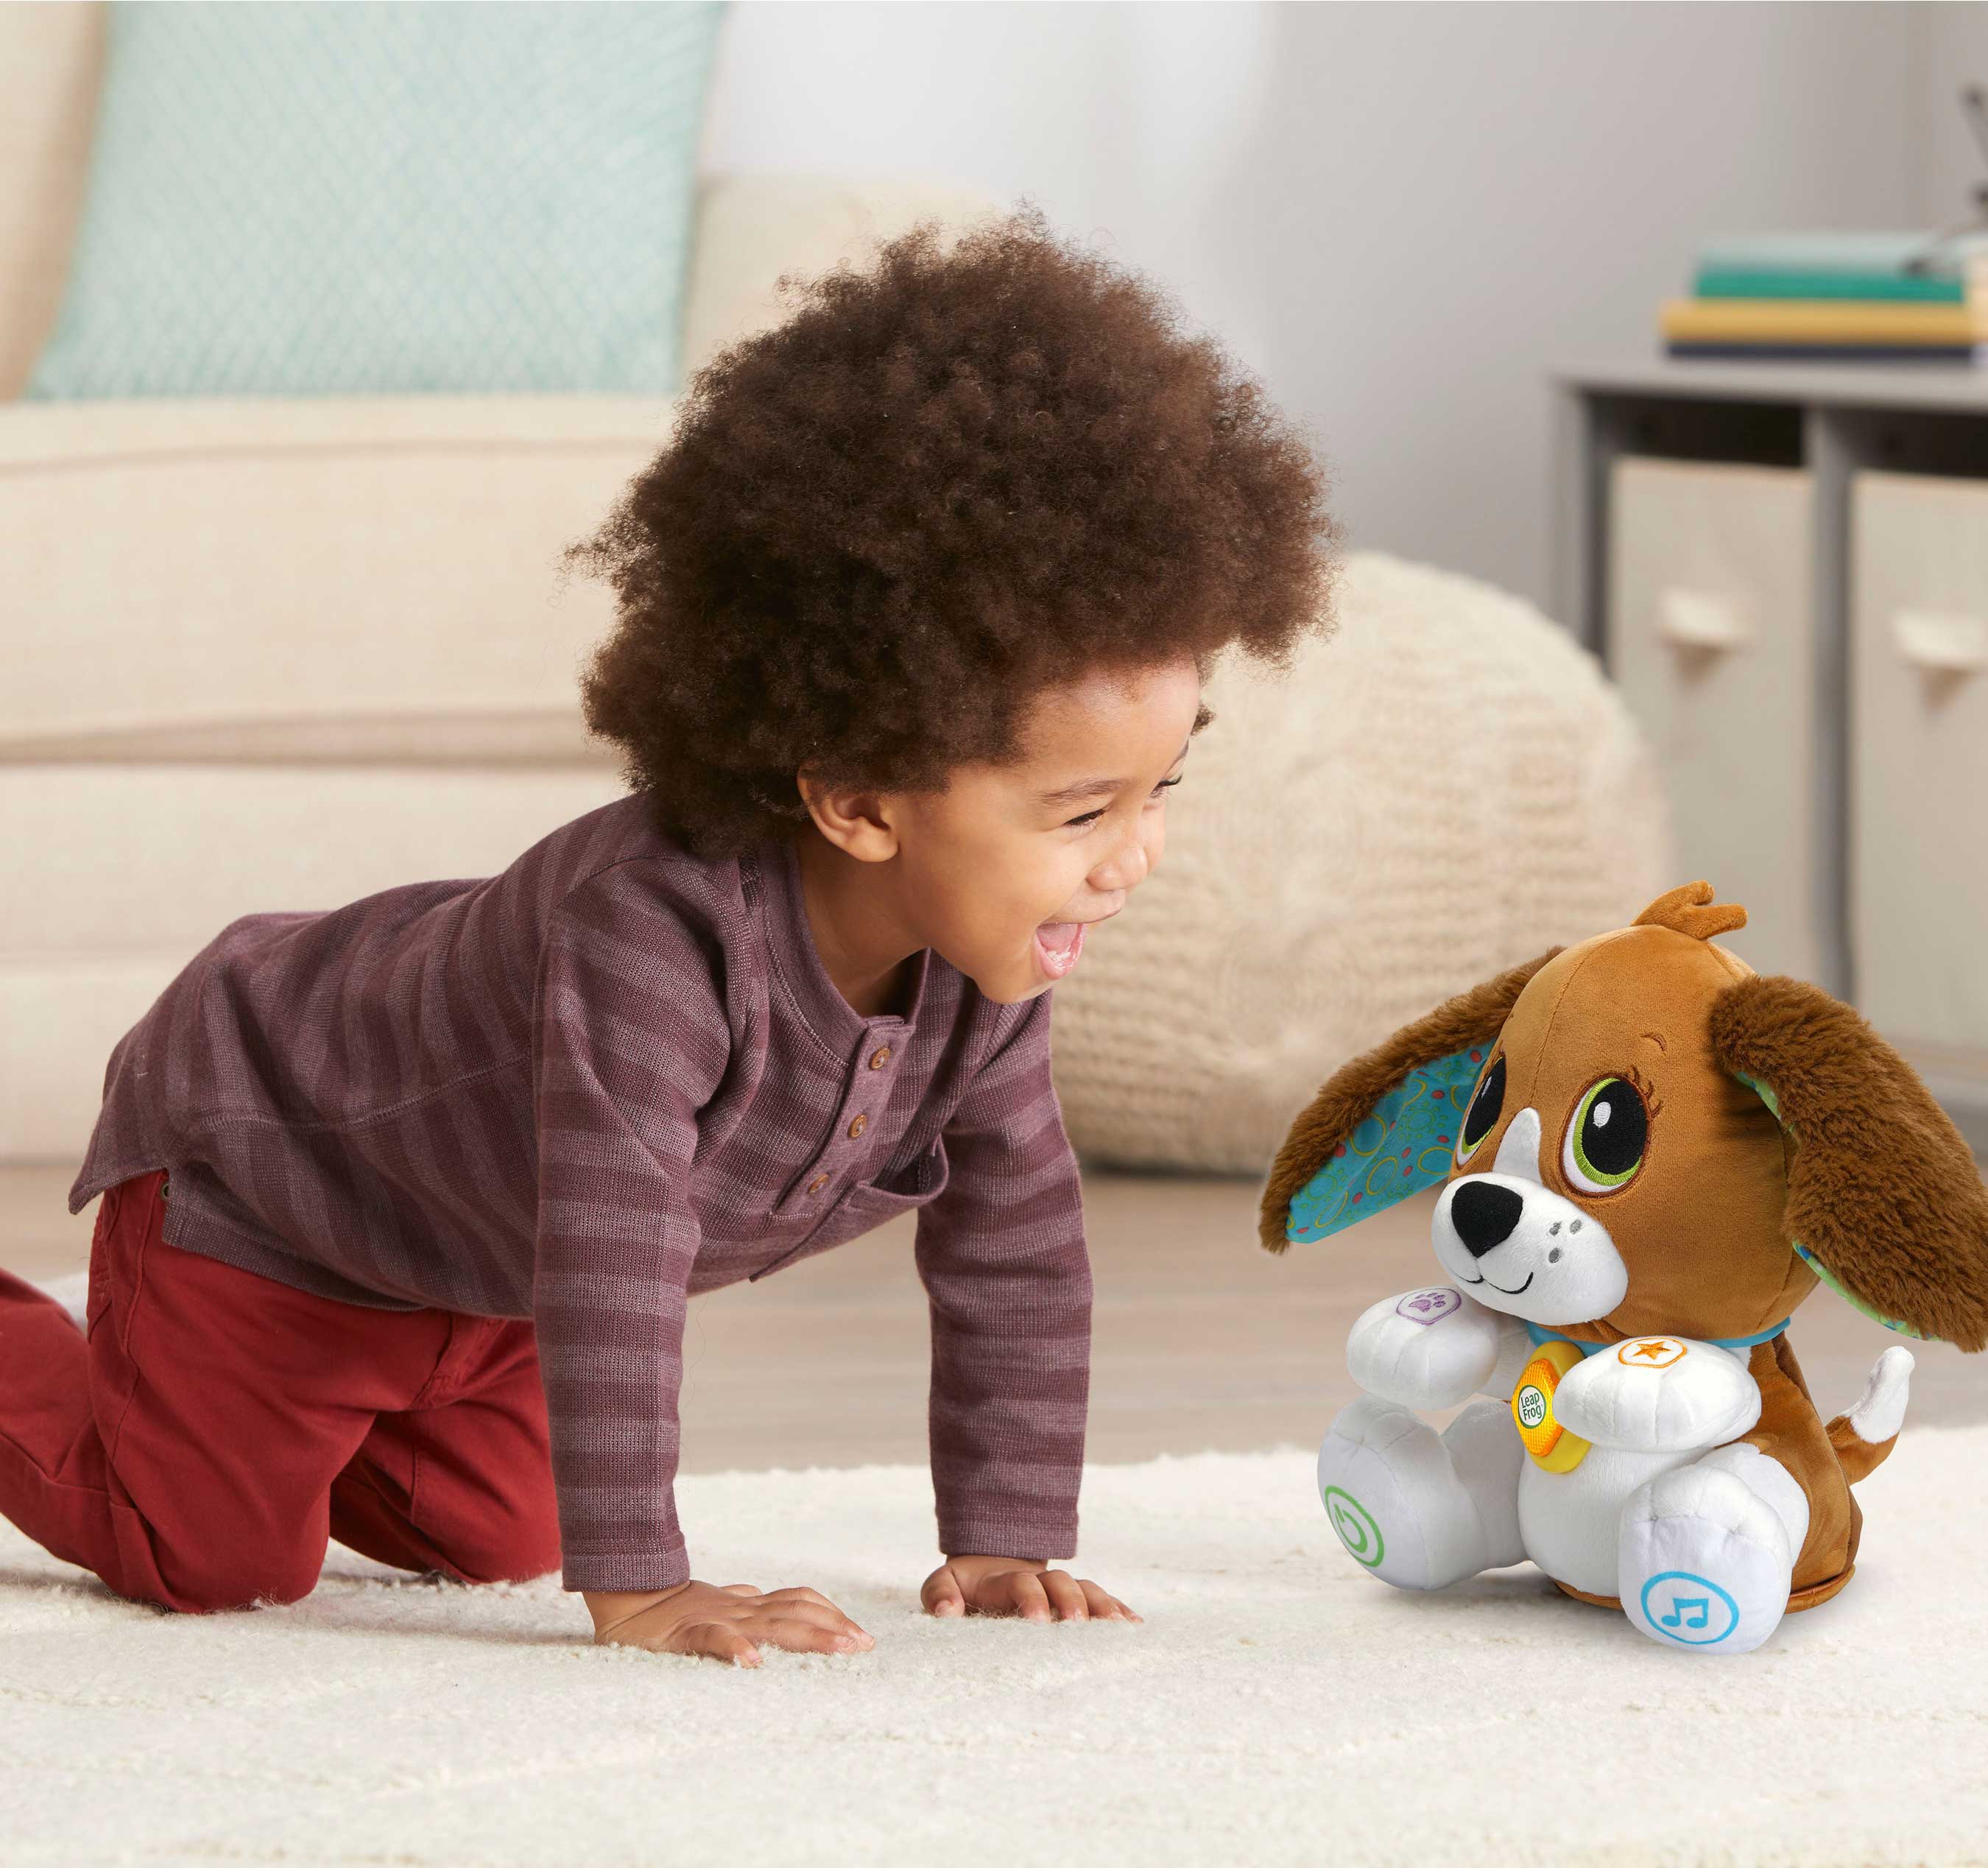 LeapFrog® introduces new infant and preschool learning toys, such as the Speak & Learn Puppy™.